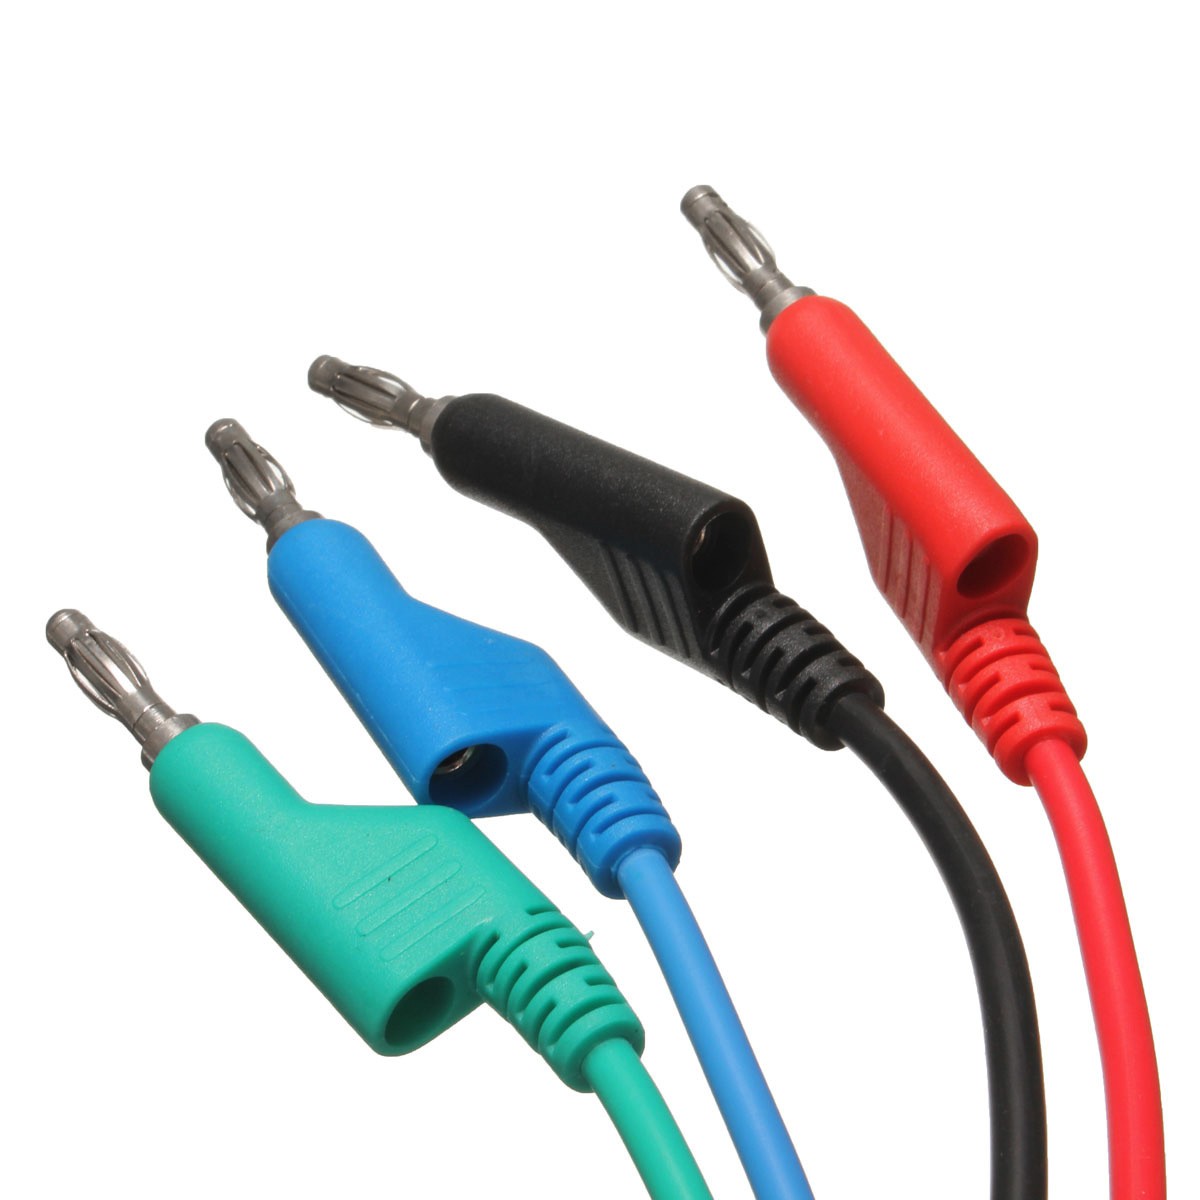 DANIU-4pcs-1M-4mm-Banana-to-Banana-Plug-Soft-Silicone-Test-Cable-Lead-for-Multimeter-4-Colors-1157595-6